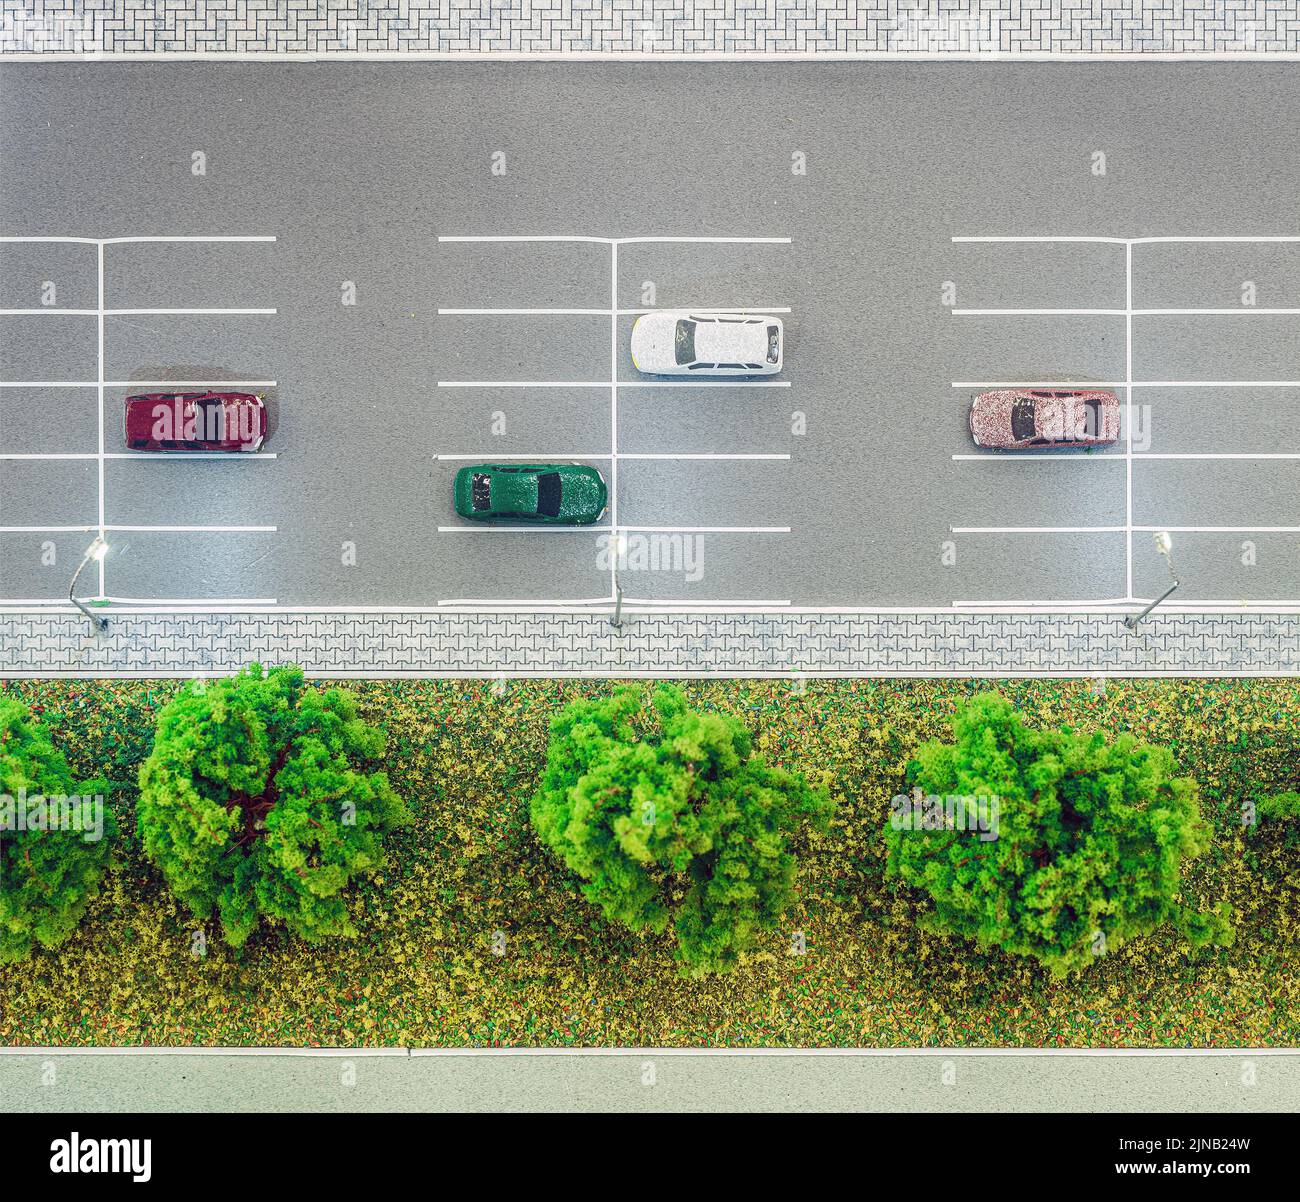 miniature scaled model of city parking lot Stock Photo